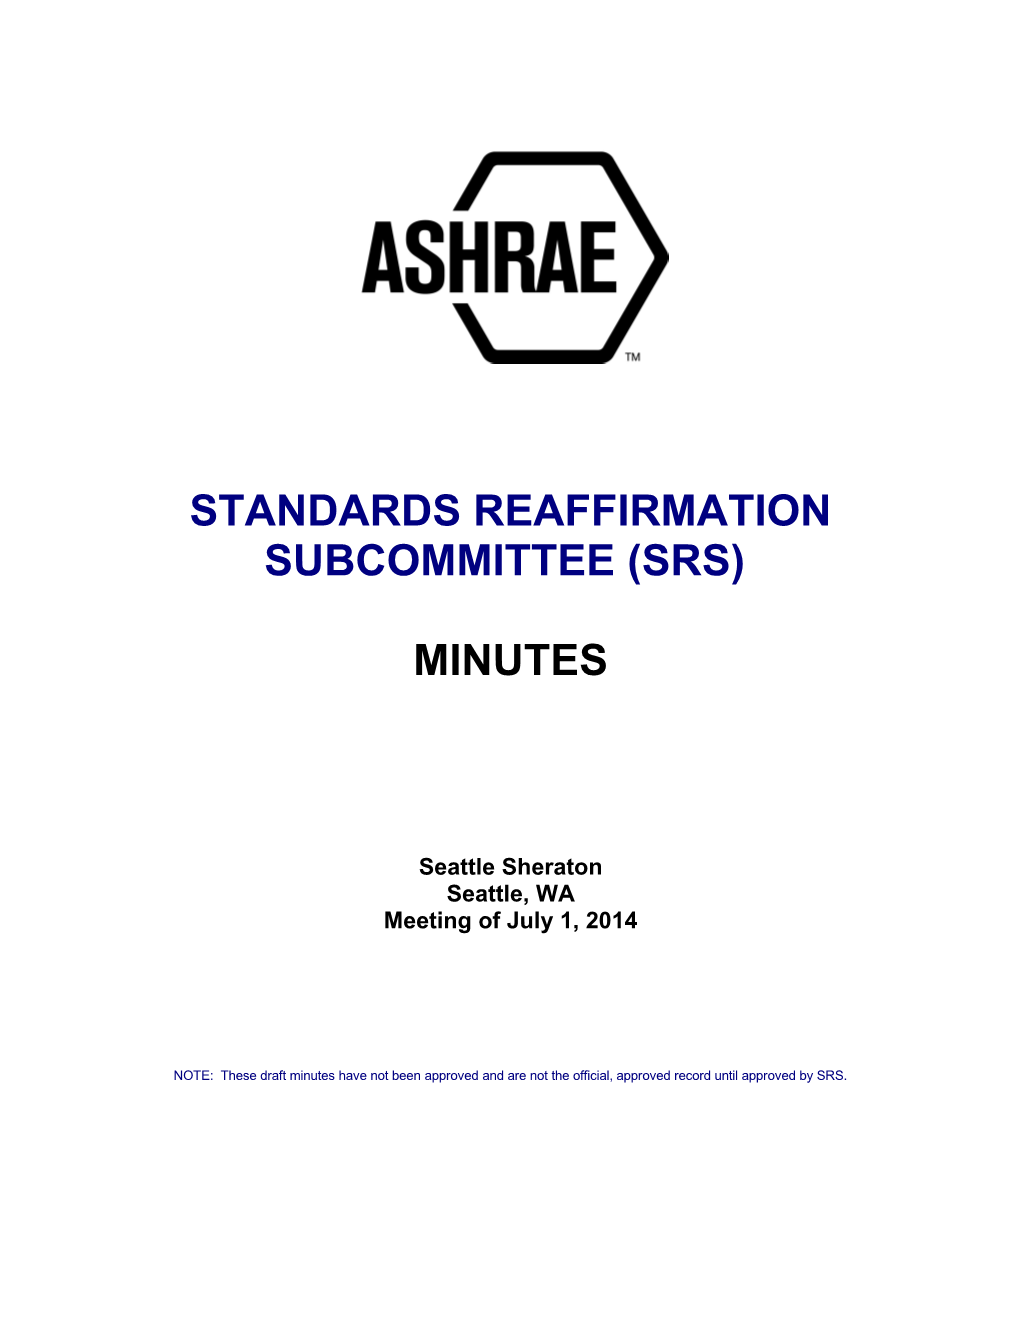 Standards Reaffirmation Subcommittee (Srs)